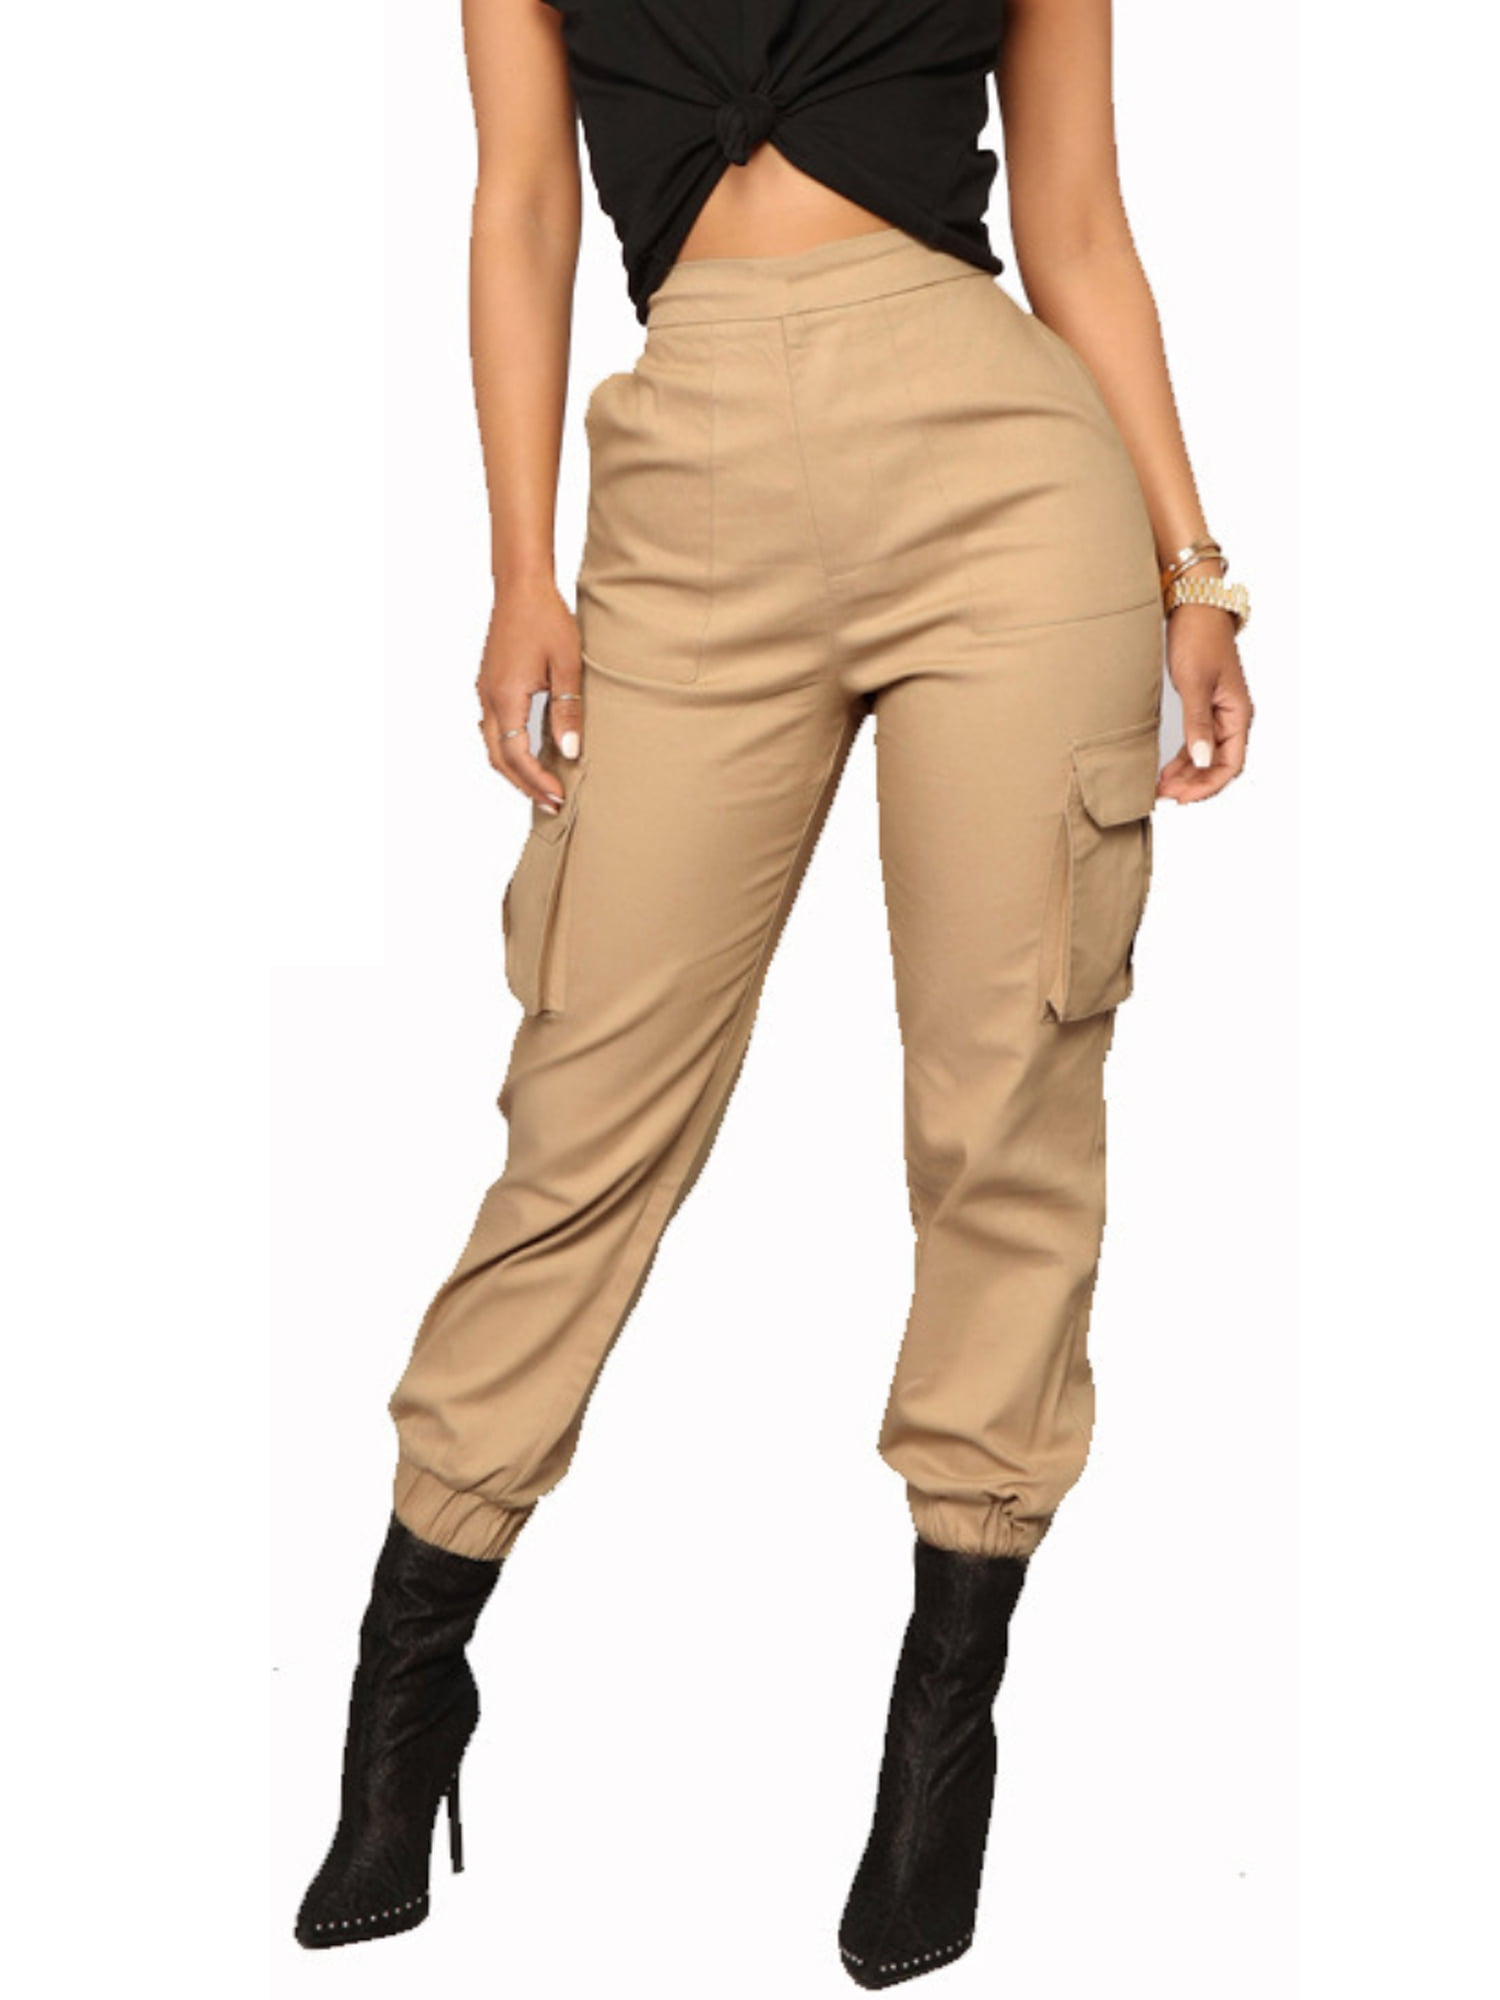 Women Camo Cargo Trousers Casual Sports Pants Ladies Military Army ...